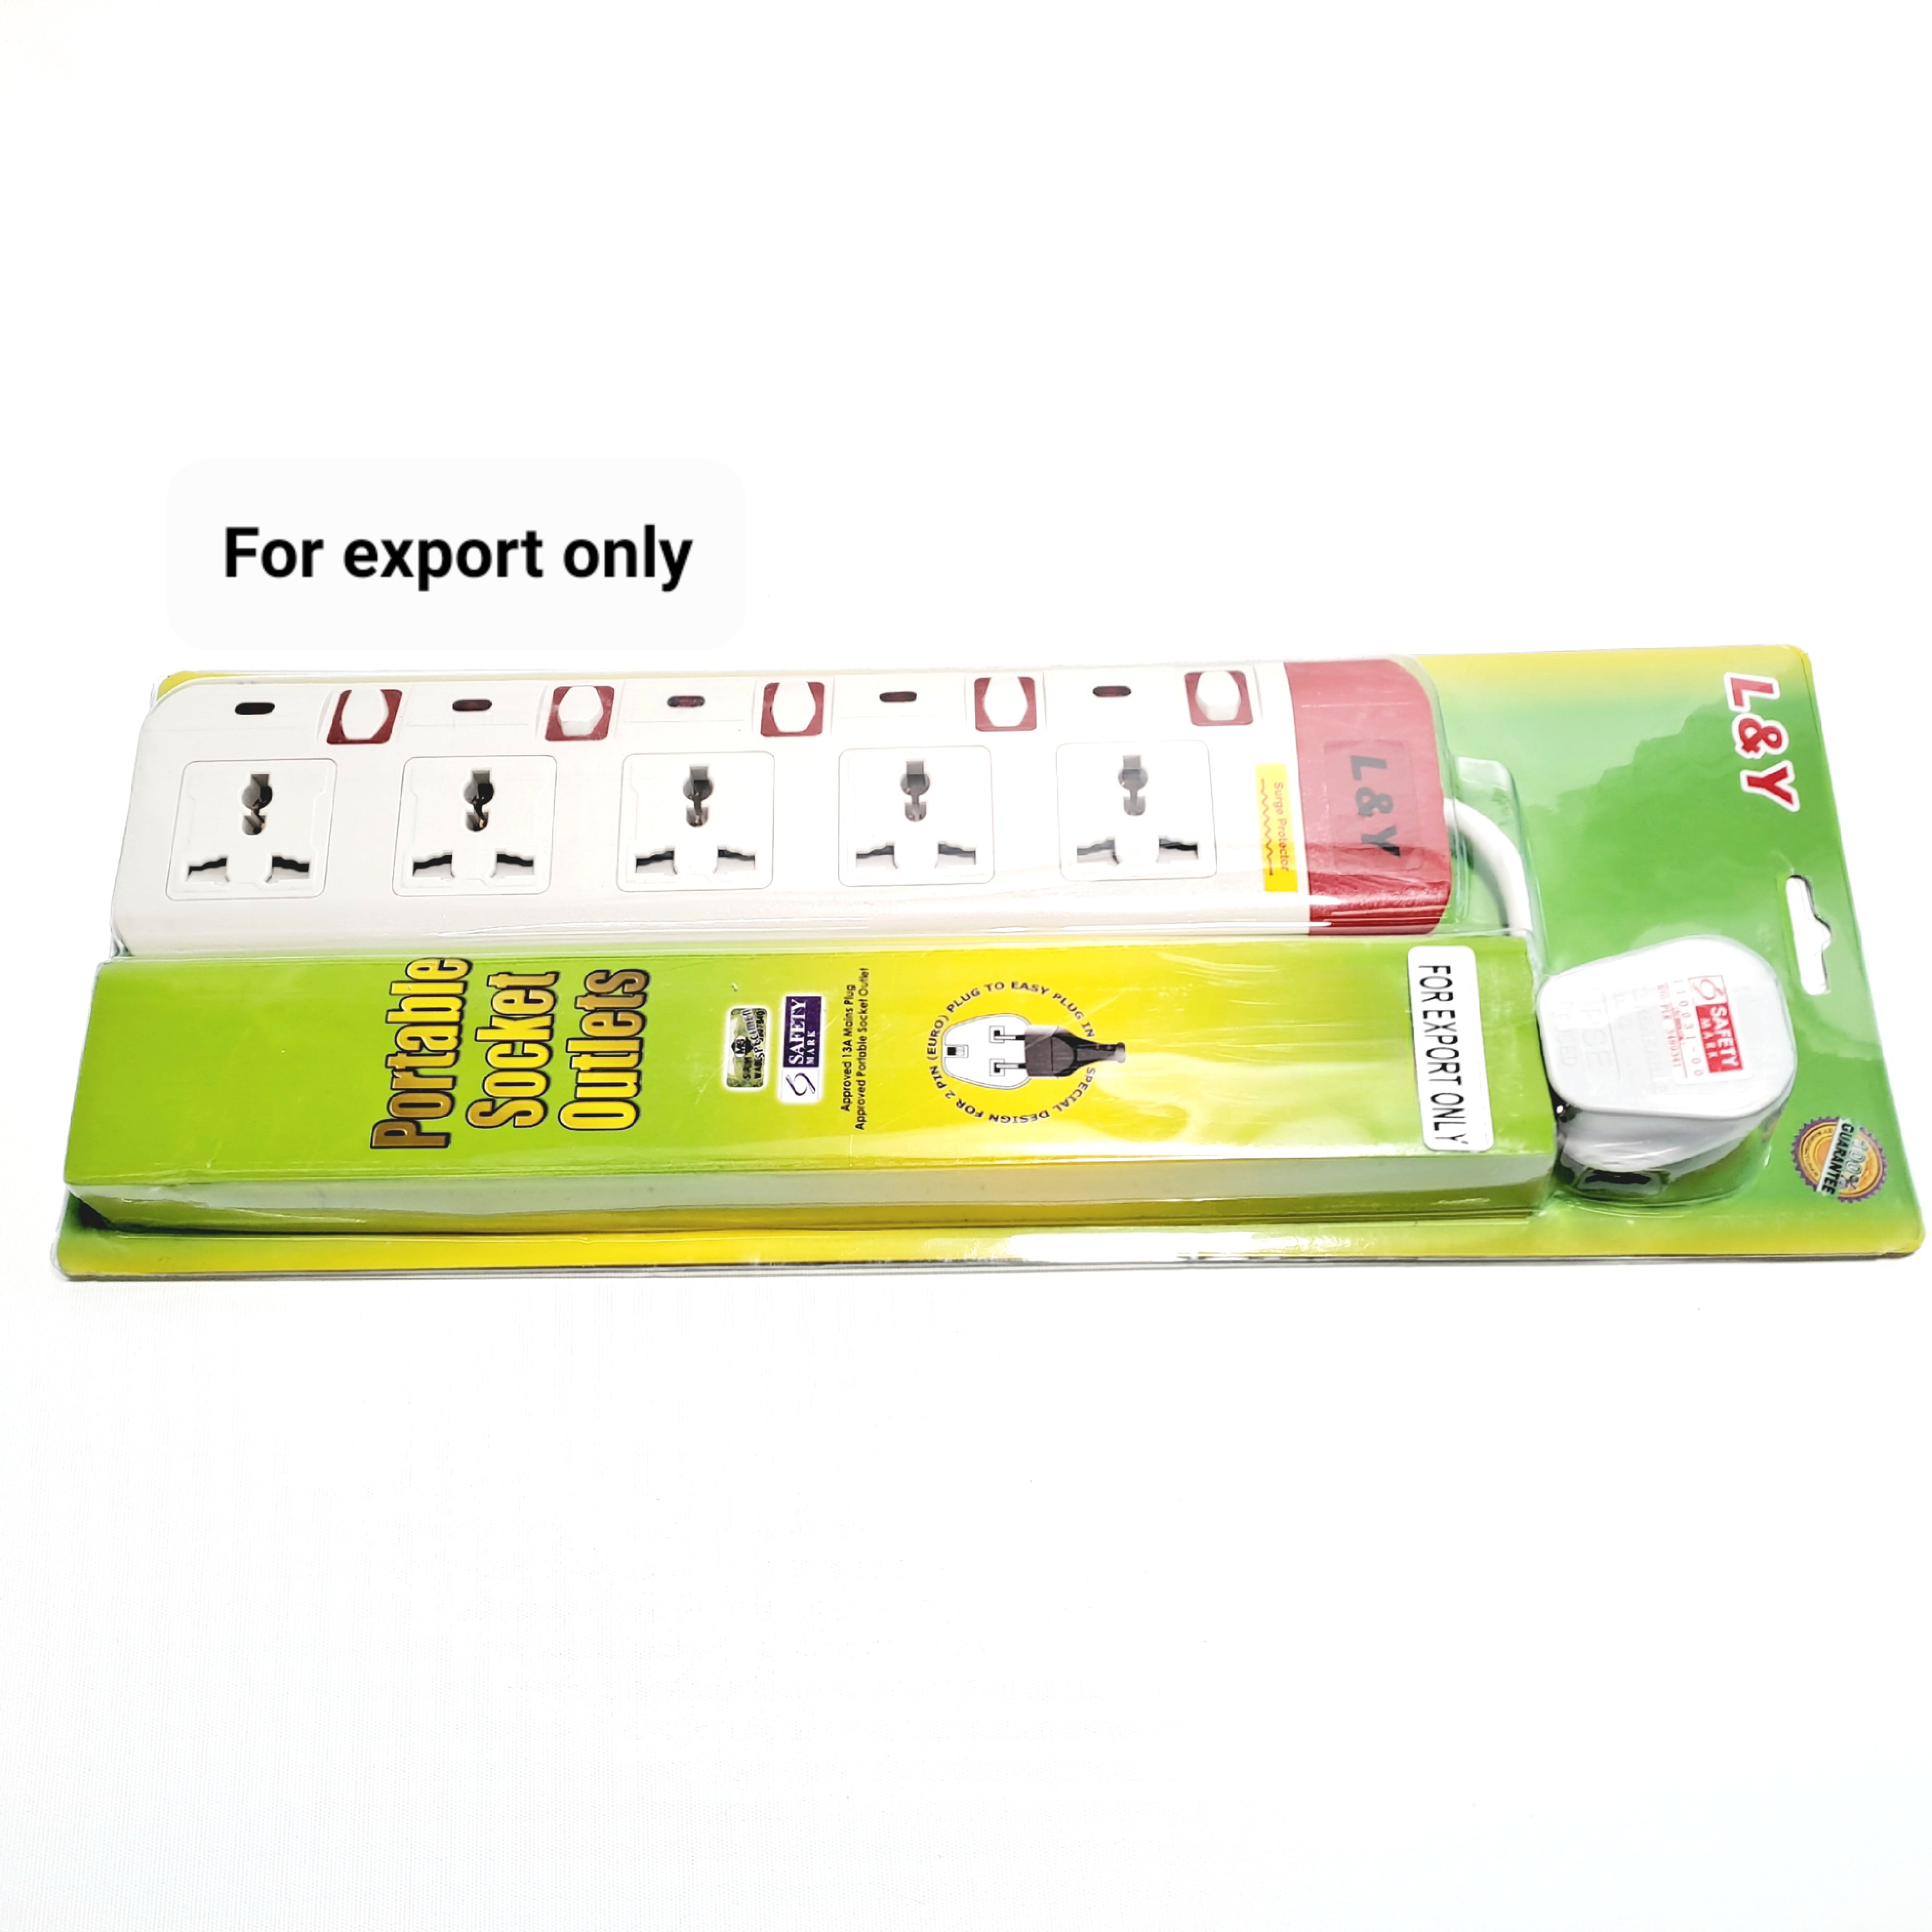 L&Y 5 Way 3pin Multi Socket-3M (for export only)